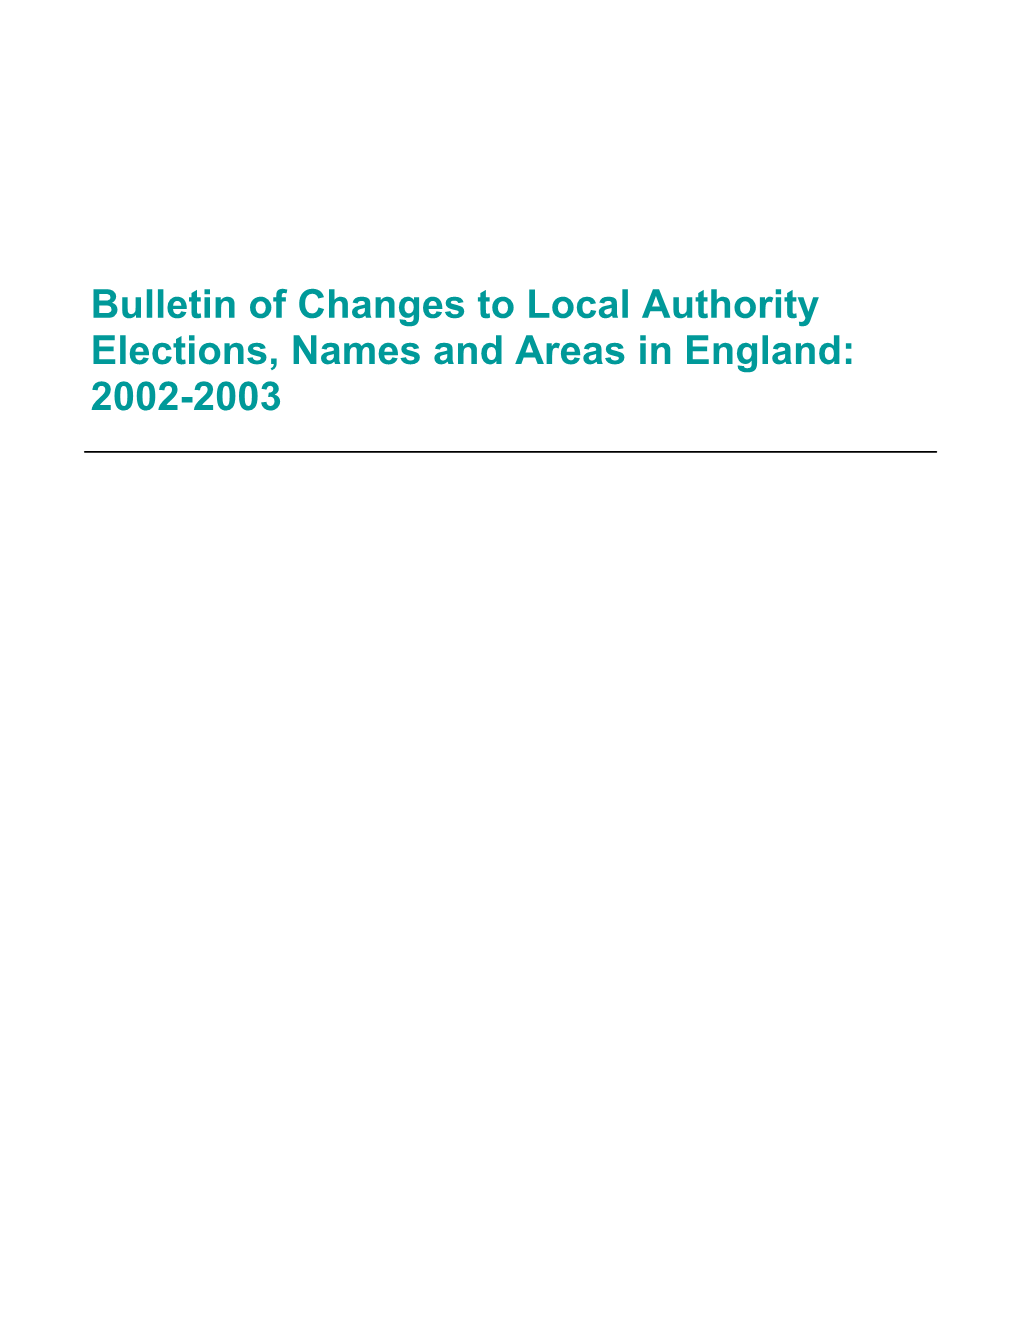 Bulletin of Changes to Local Authority Elections, Names and Areas in England: 2002-2003